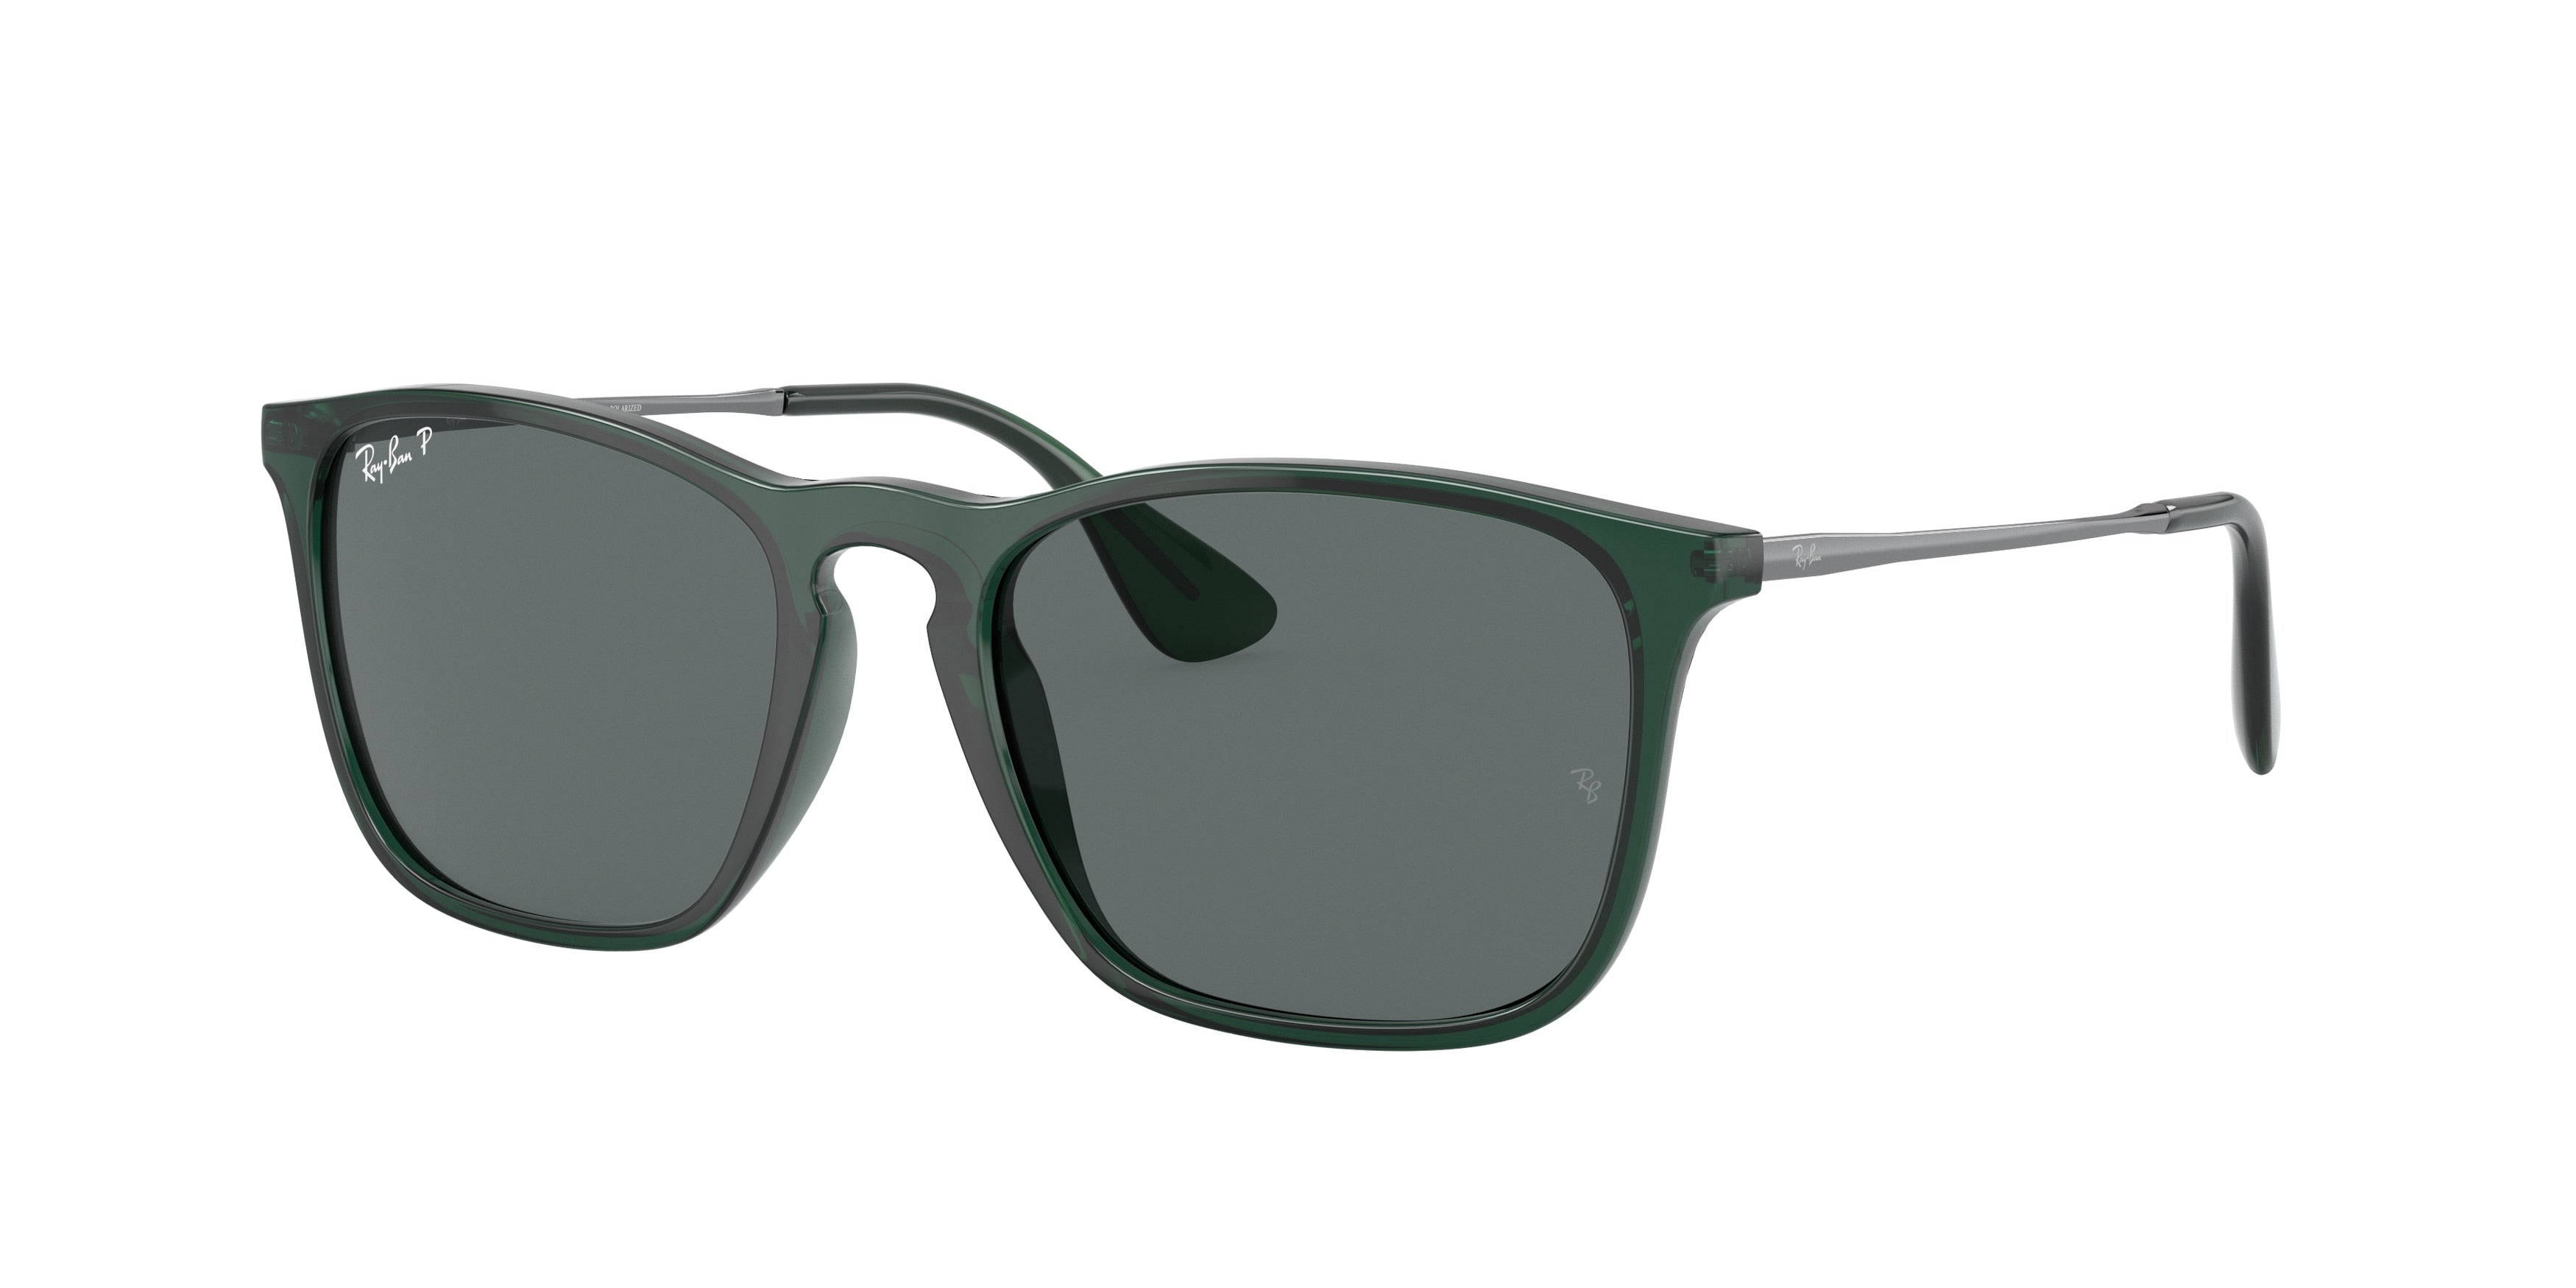 Ray-Ban CHRIS RB4187F Square Sunglasses  666381-Transparent Green 54-145-18 - Color Map Green